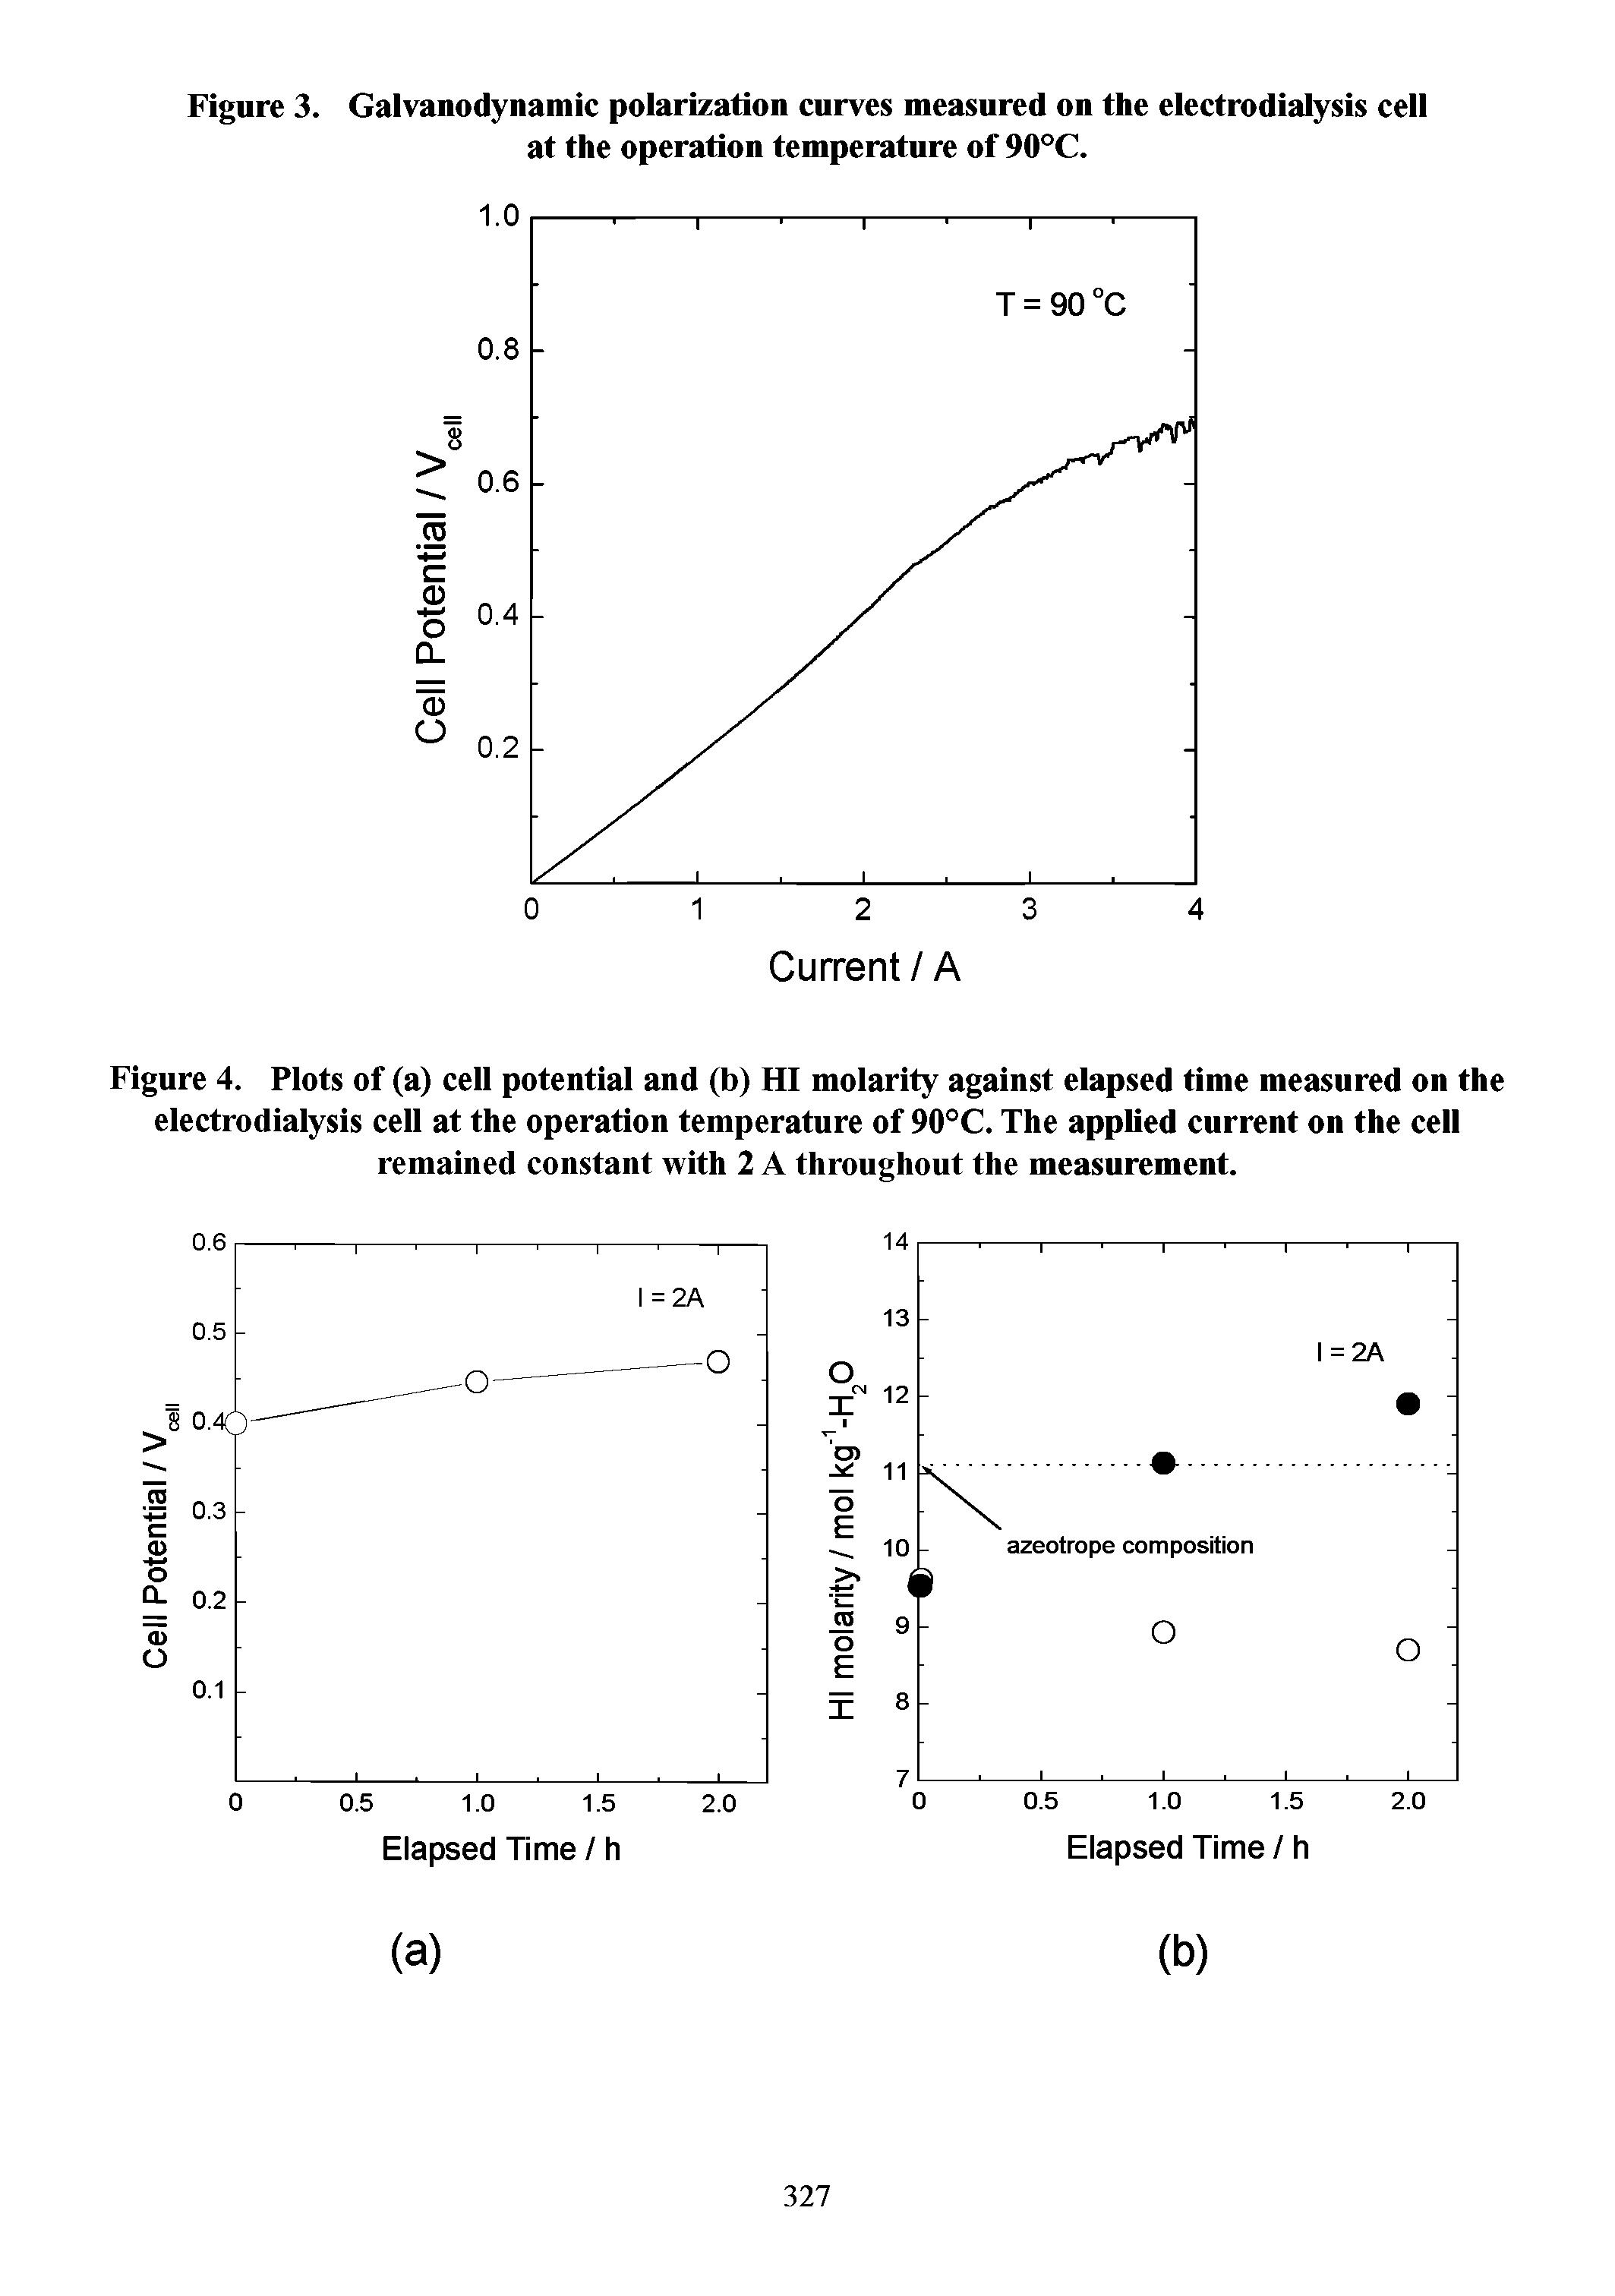 Figure 4. Plots of (a) cell potential and (b) HI molarity against elapsed time measured on the electrodialysis cell at the operation temperature of 90°C. The applied current on the cell remained constant with 2 A throughout the measurement.